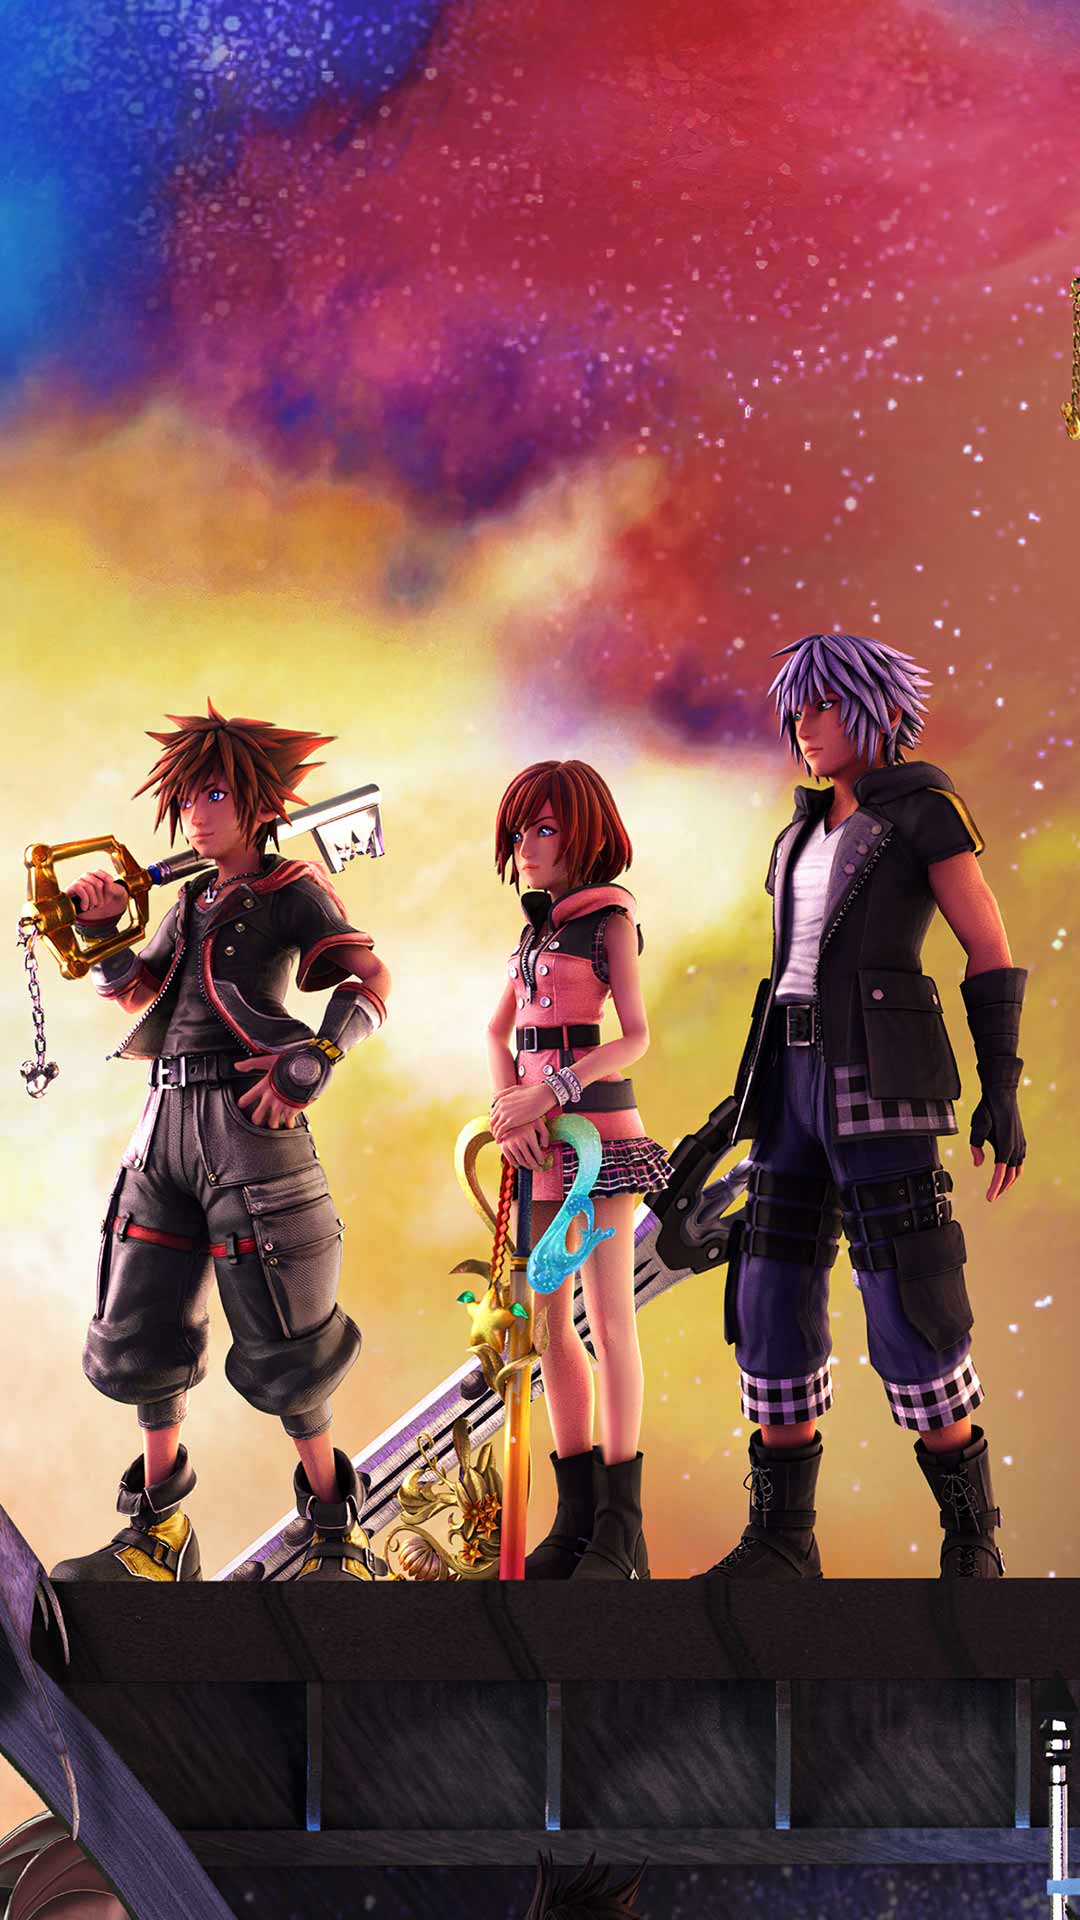 Kingdom hearts 3 phone wallpaper background for free download